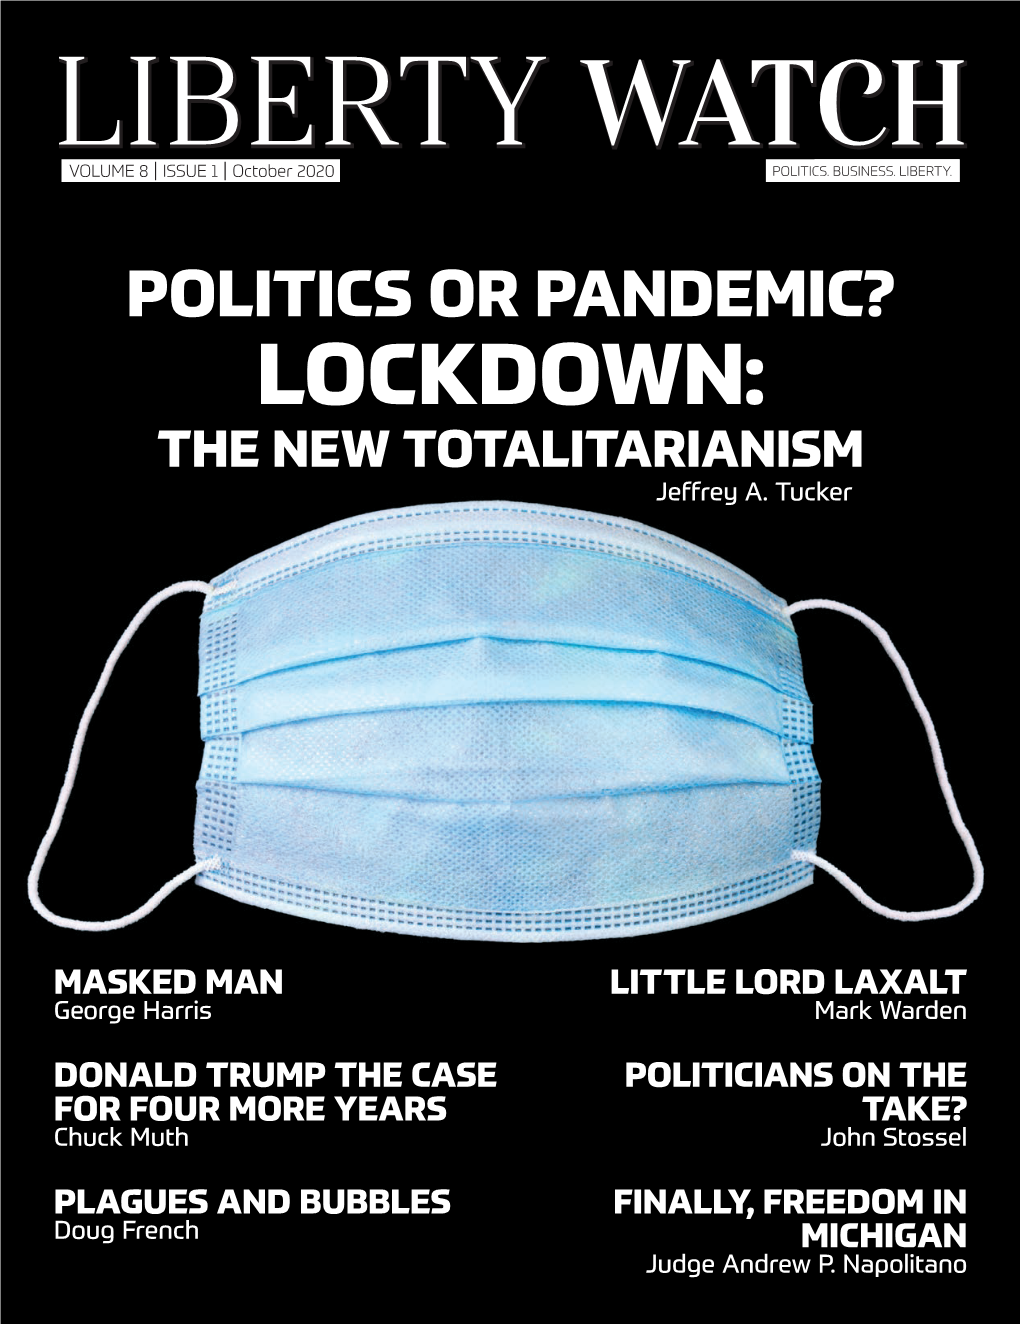 LOCKDOWN: the NEW TOTALITARIANISM Jeffrey A